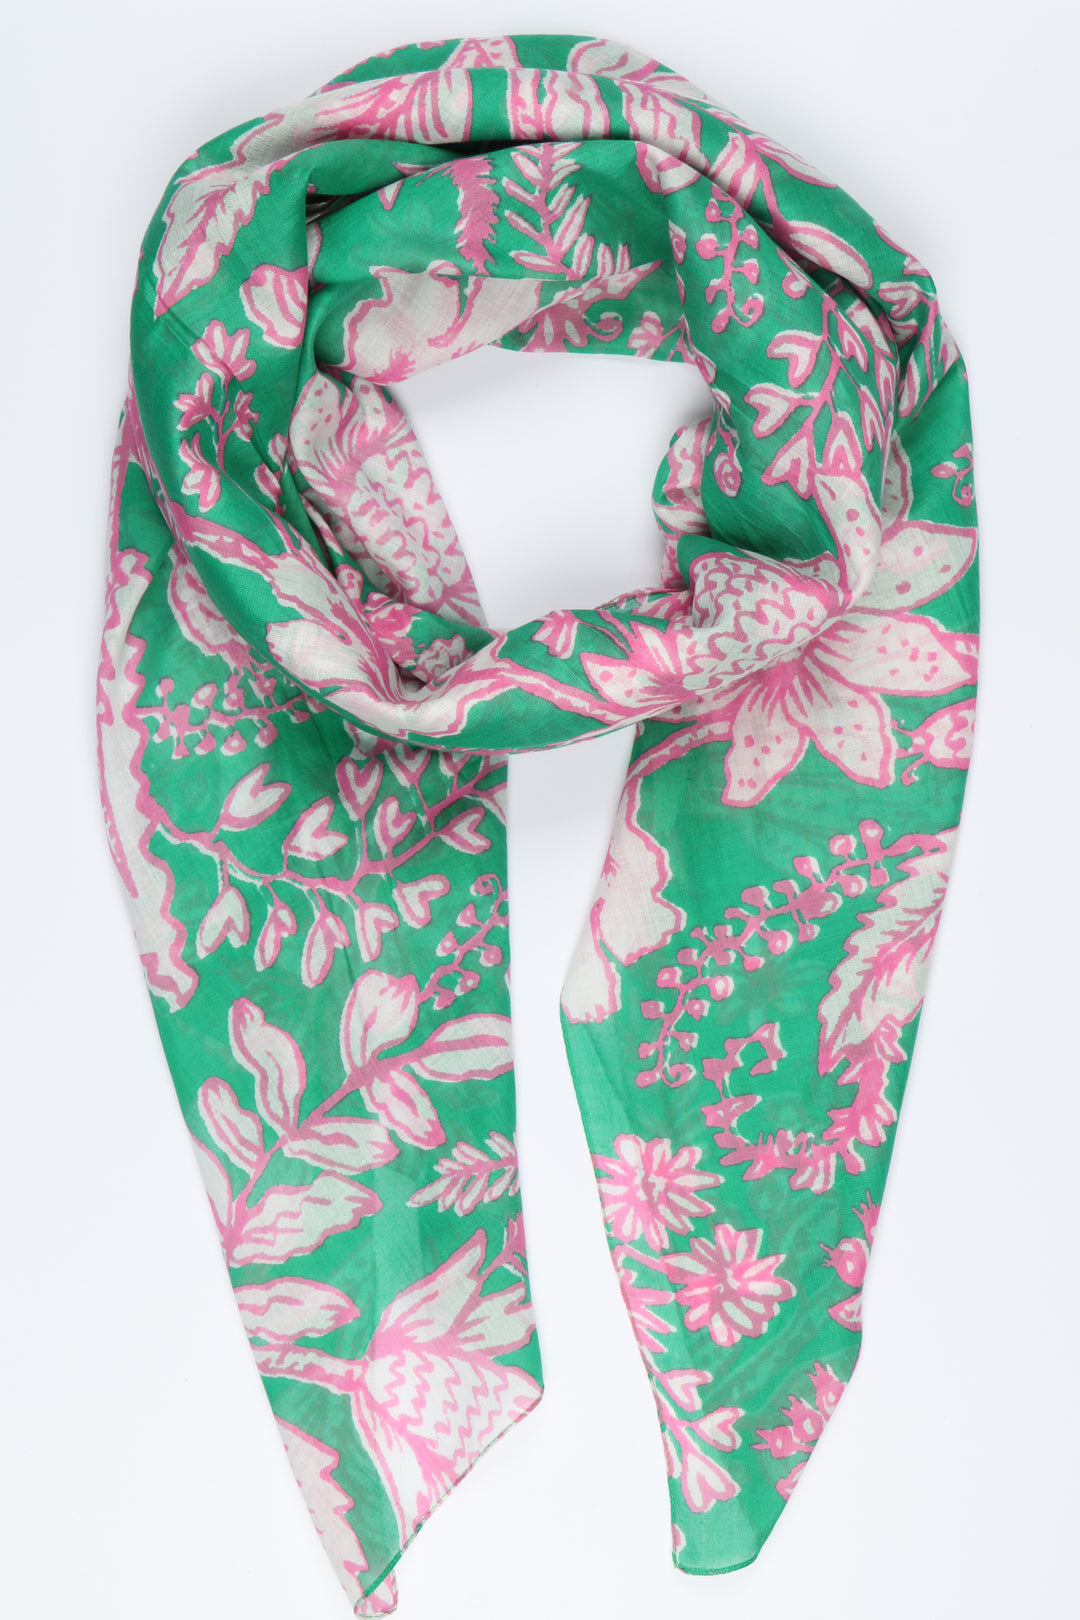 Delicate Floral Print Cotton Scarf in Green Pink